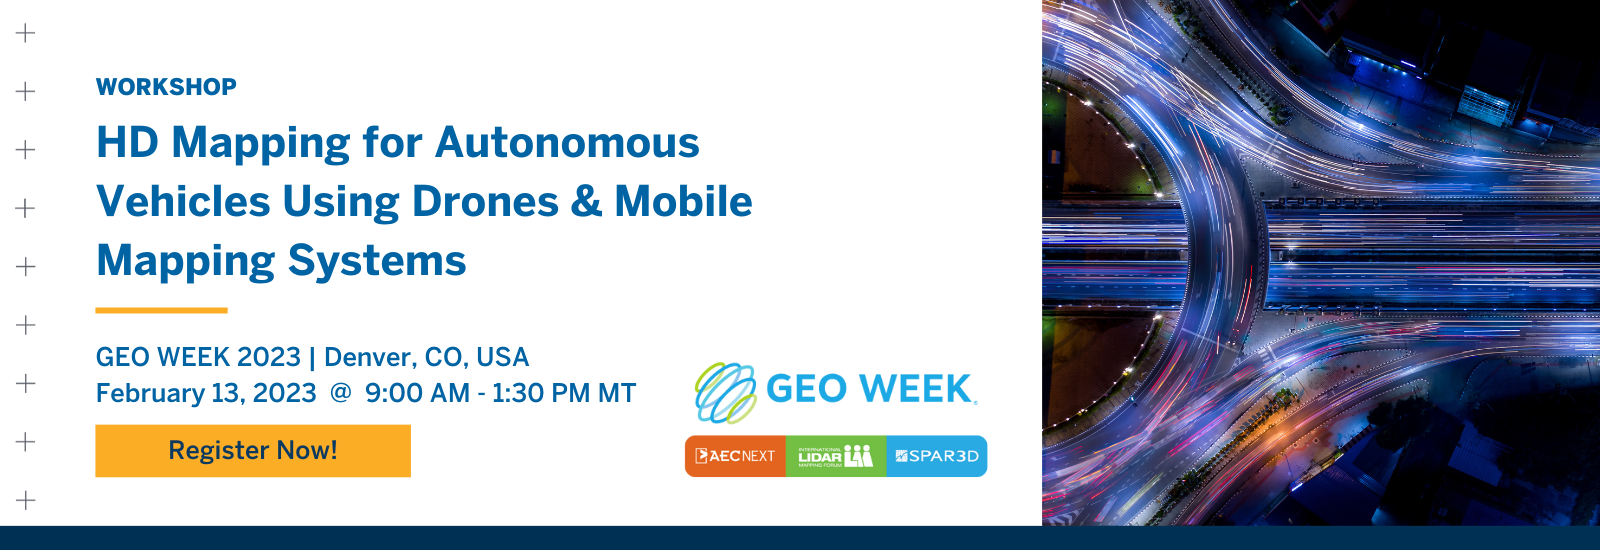 Join us for our workshop at Geo Week 2023 on HD Mapping for Autonomous Vehicles Using Drones & Mobile Mapping Systems!